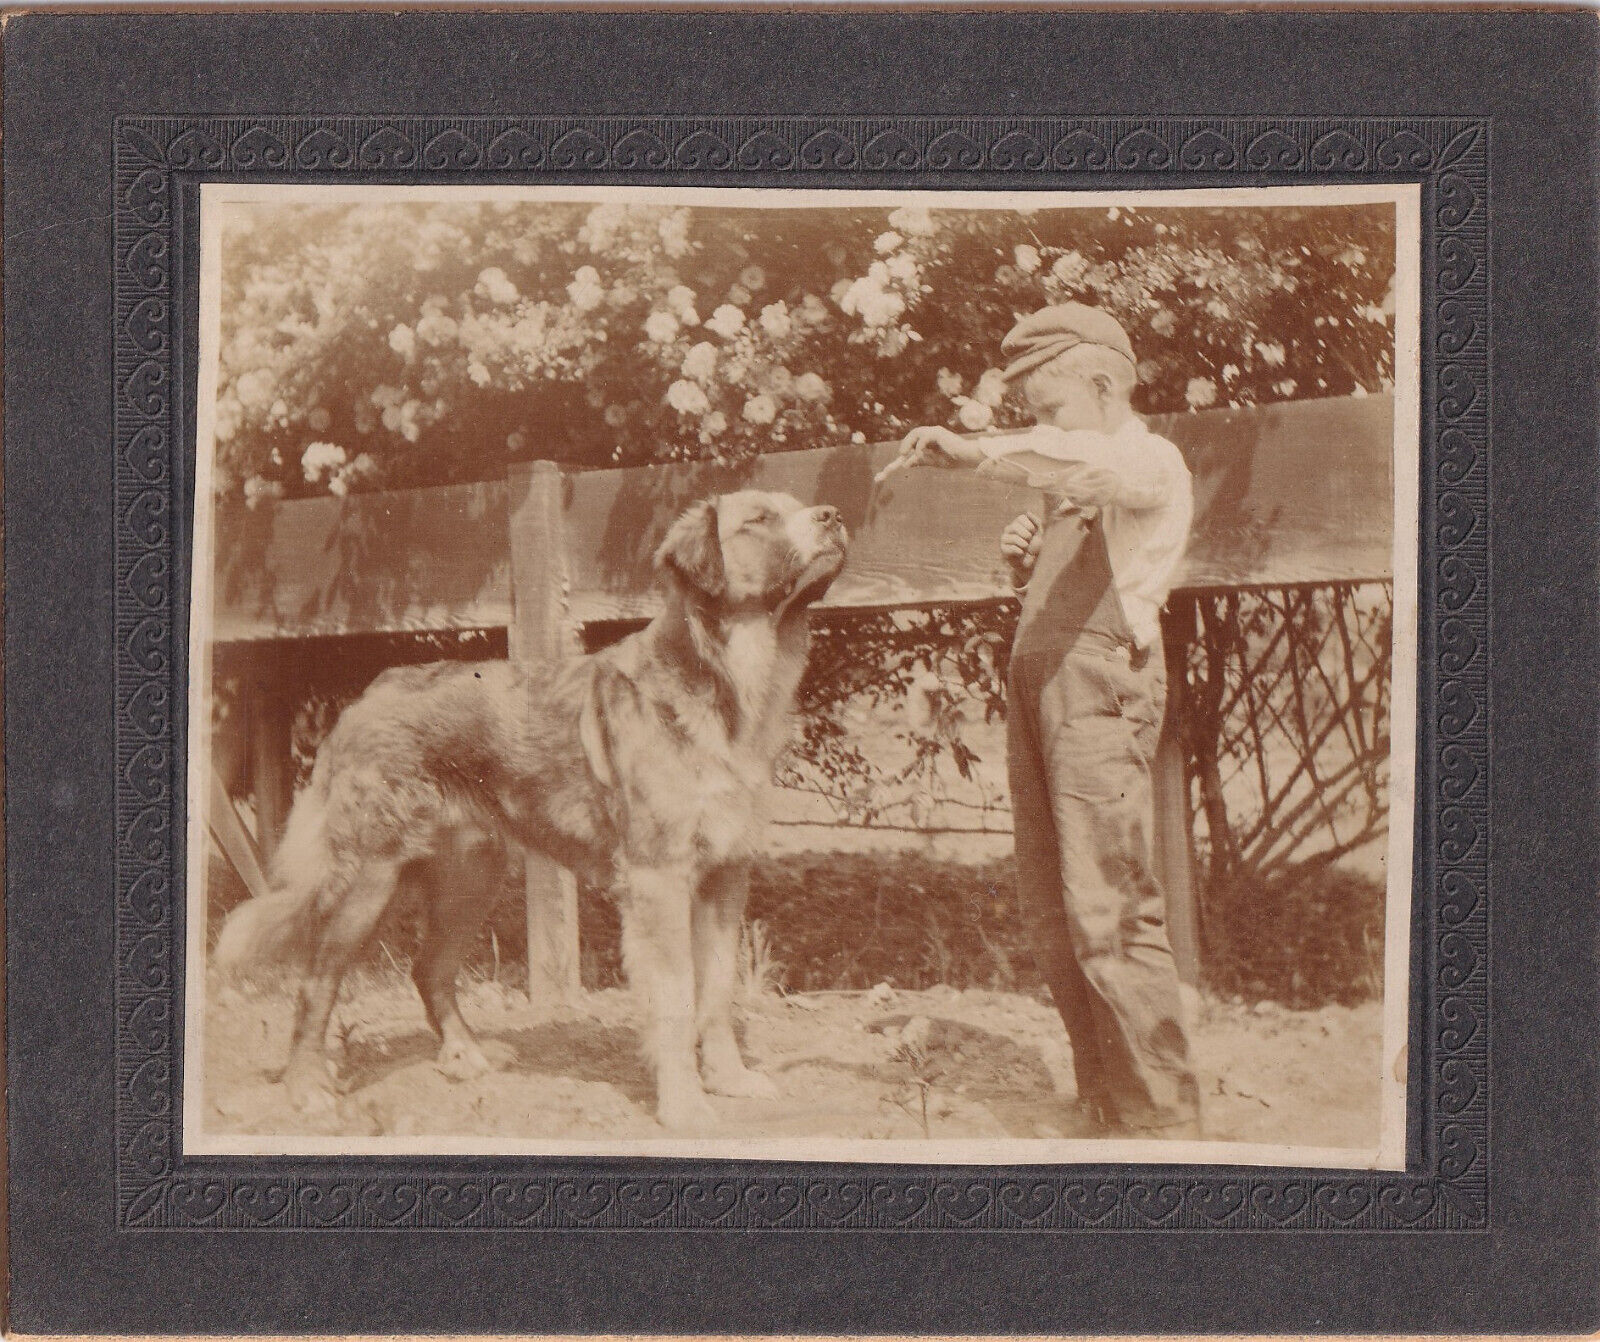 YOUNG BOY FEEDING LARGE DOG Old Vintage Cabinet Card Photo Outdoor